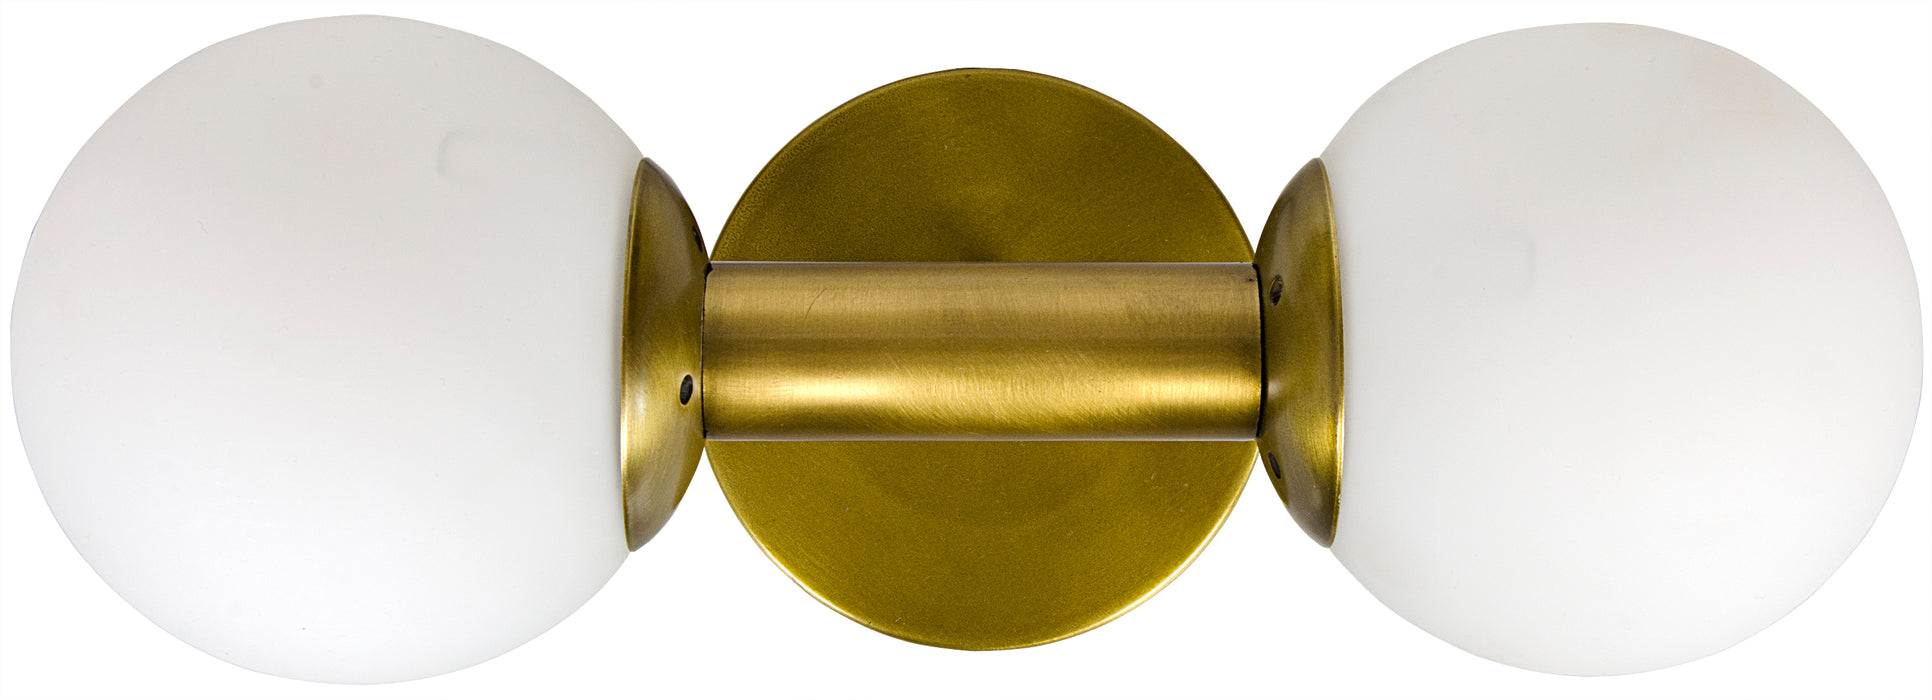 Antiope Sconce, Antique Brass and Glass